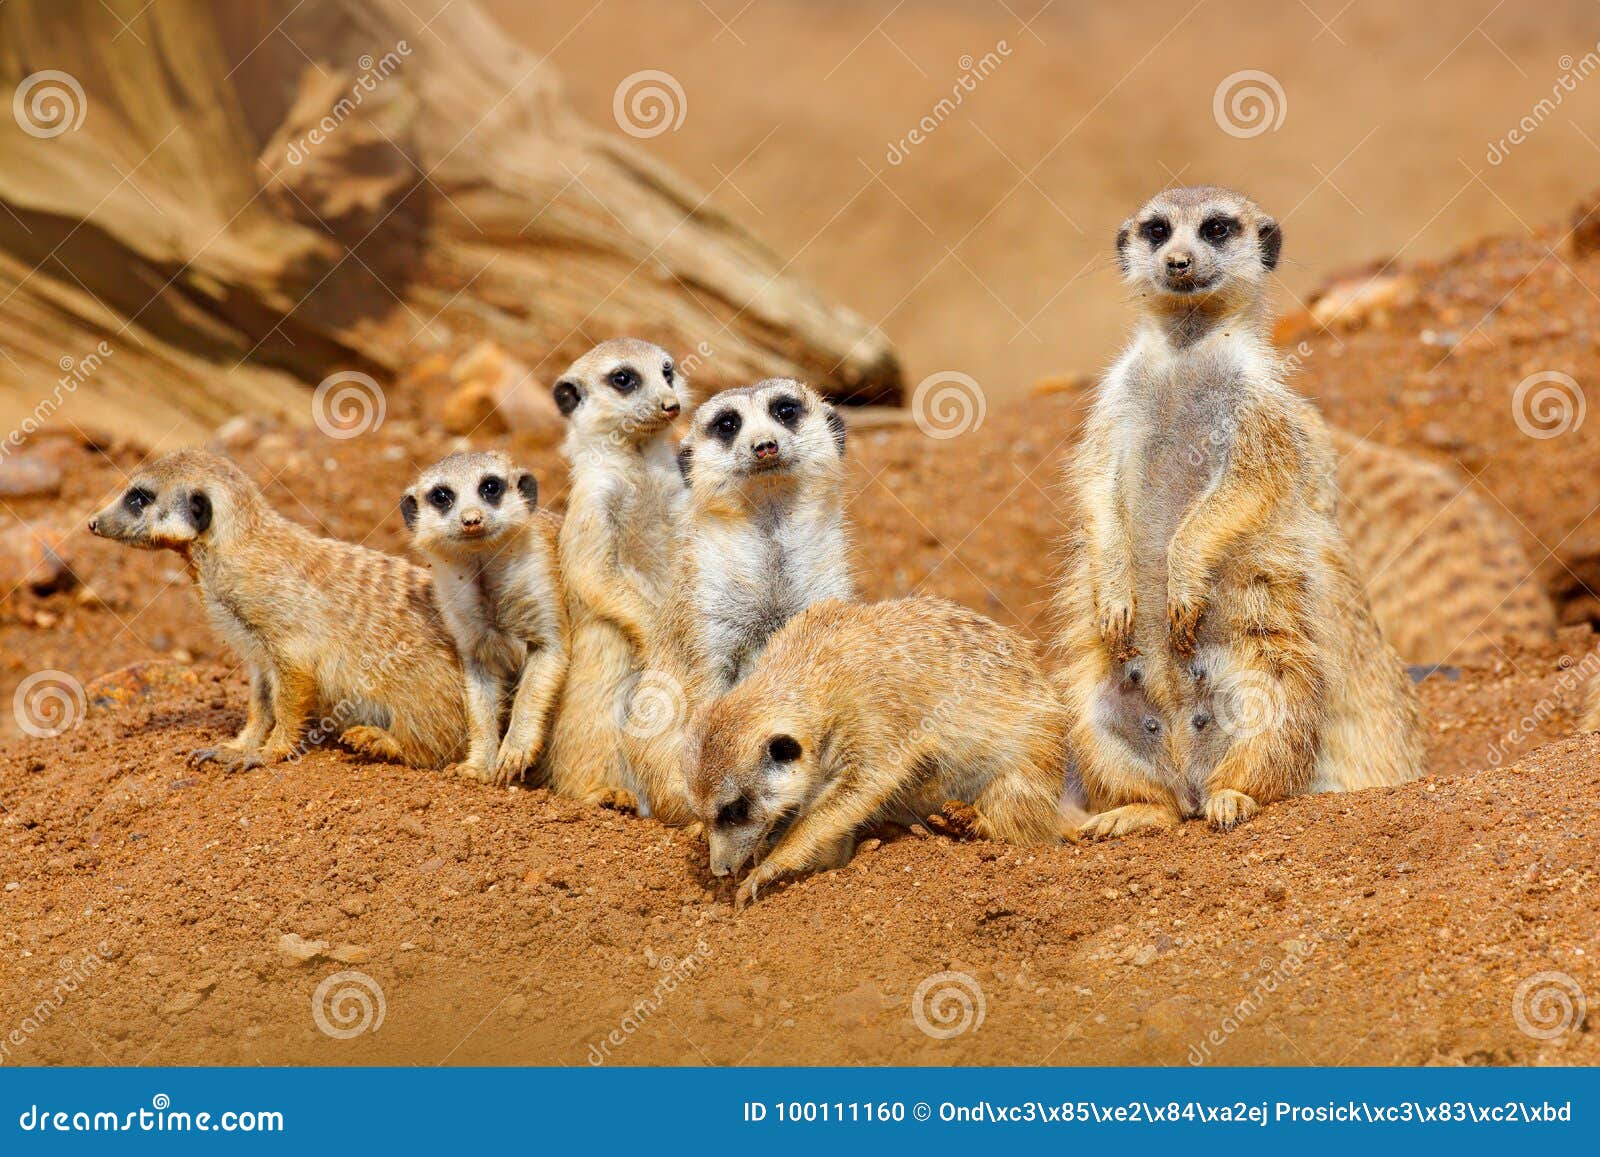 8,758 Funny Animal Desert Stock Photos - Free & Royalty-Free Stock Photos  from Dreamstime